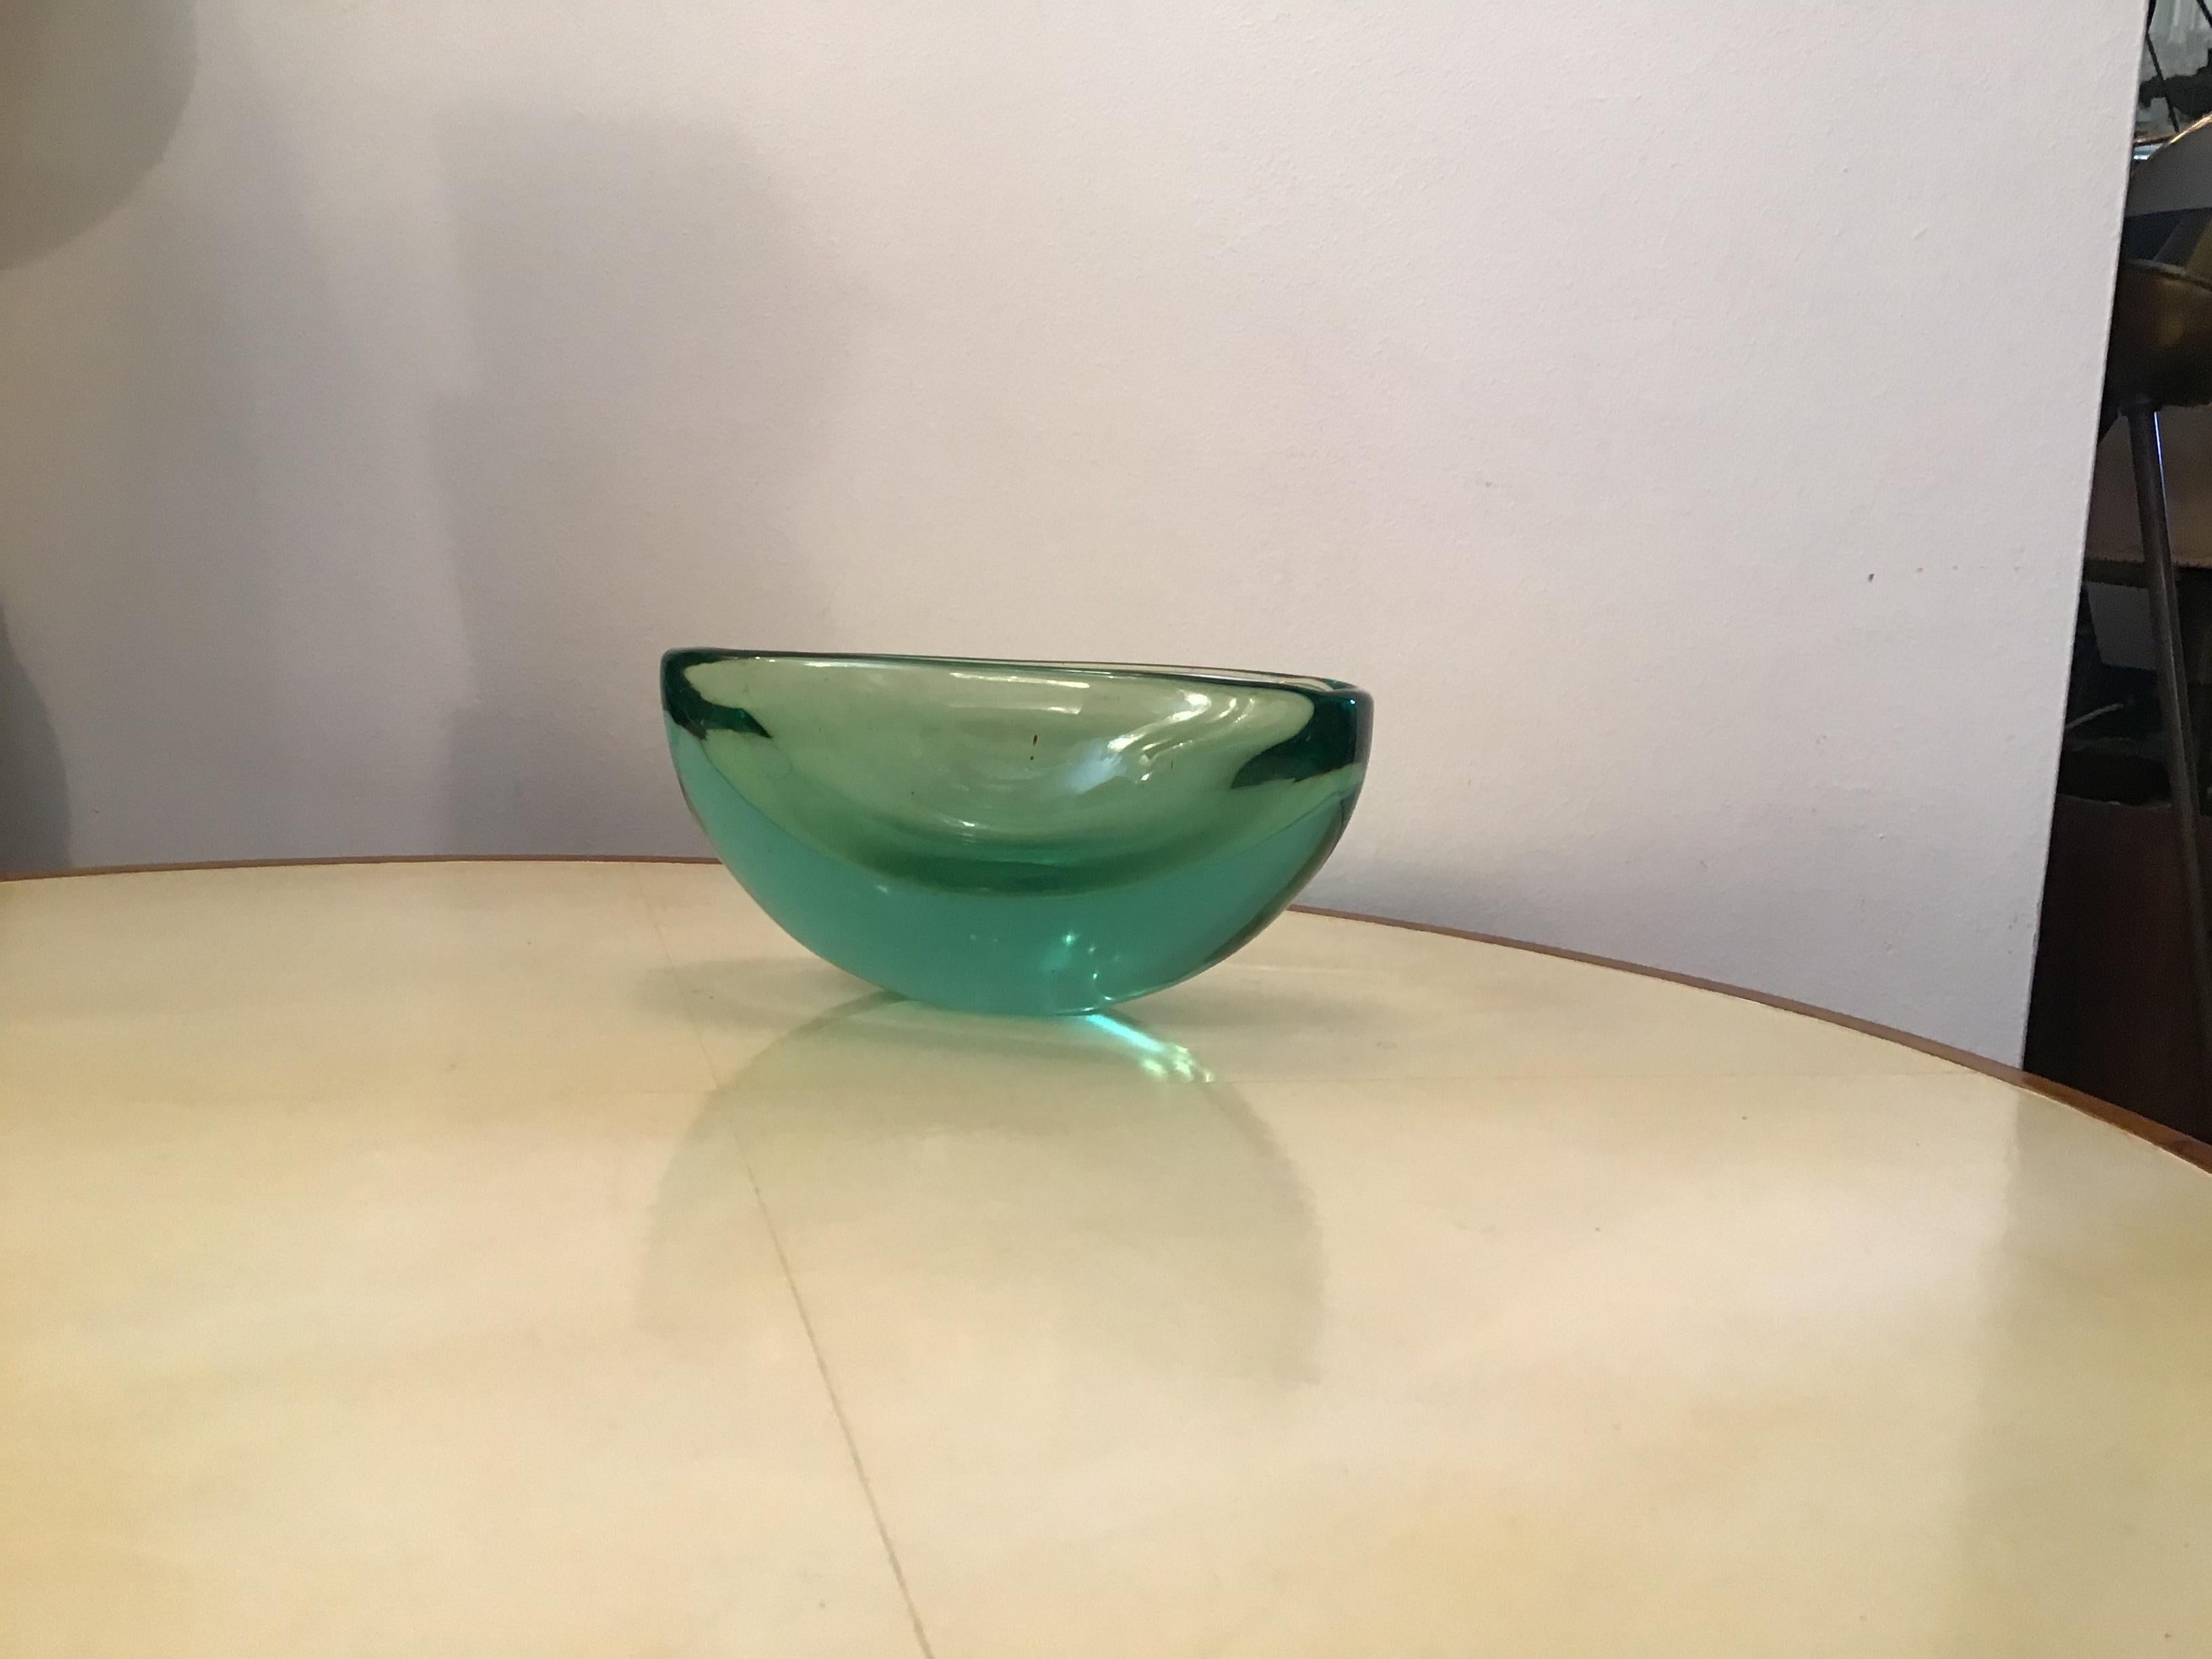 Archimede Seguso Oval Bowl, Green Submerged Glass Centrepiece, 1950 For Sale 1